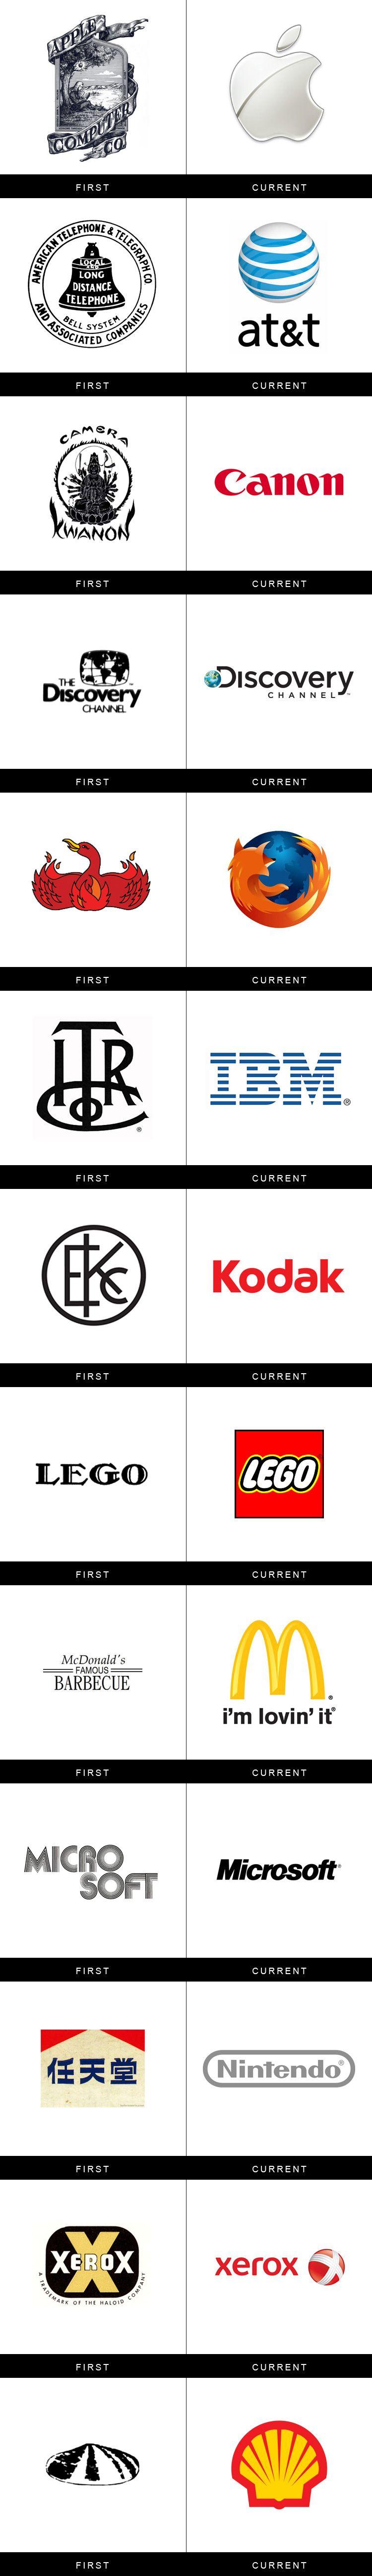 Current Company Logo - How company logos looked in the past vs today | Today I Learned ...